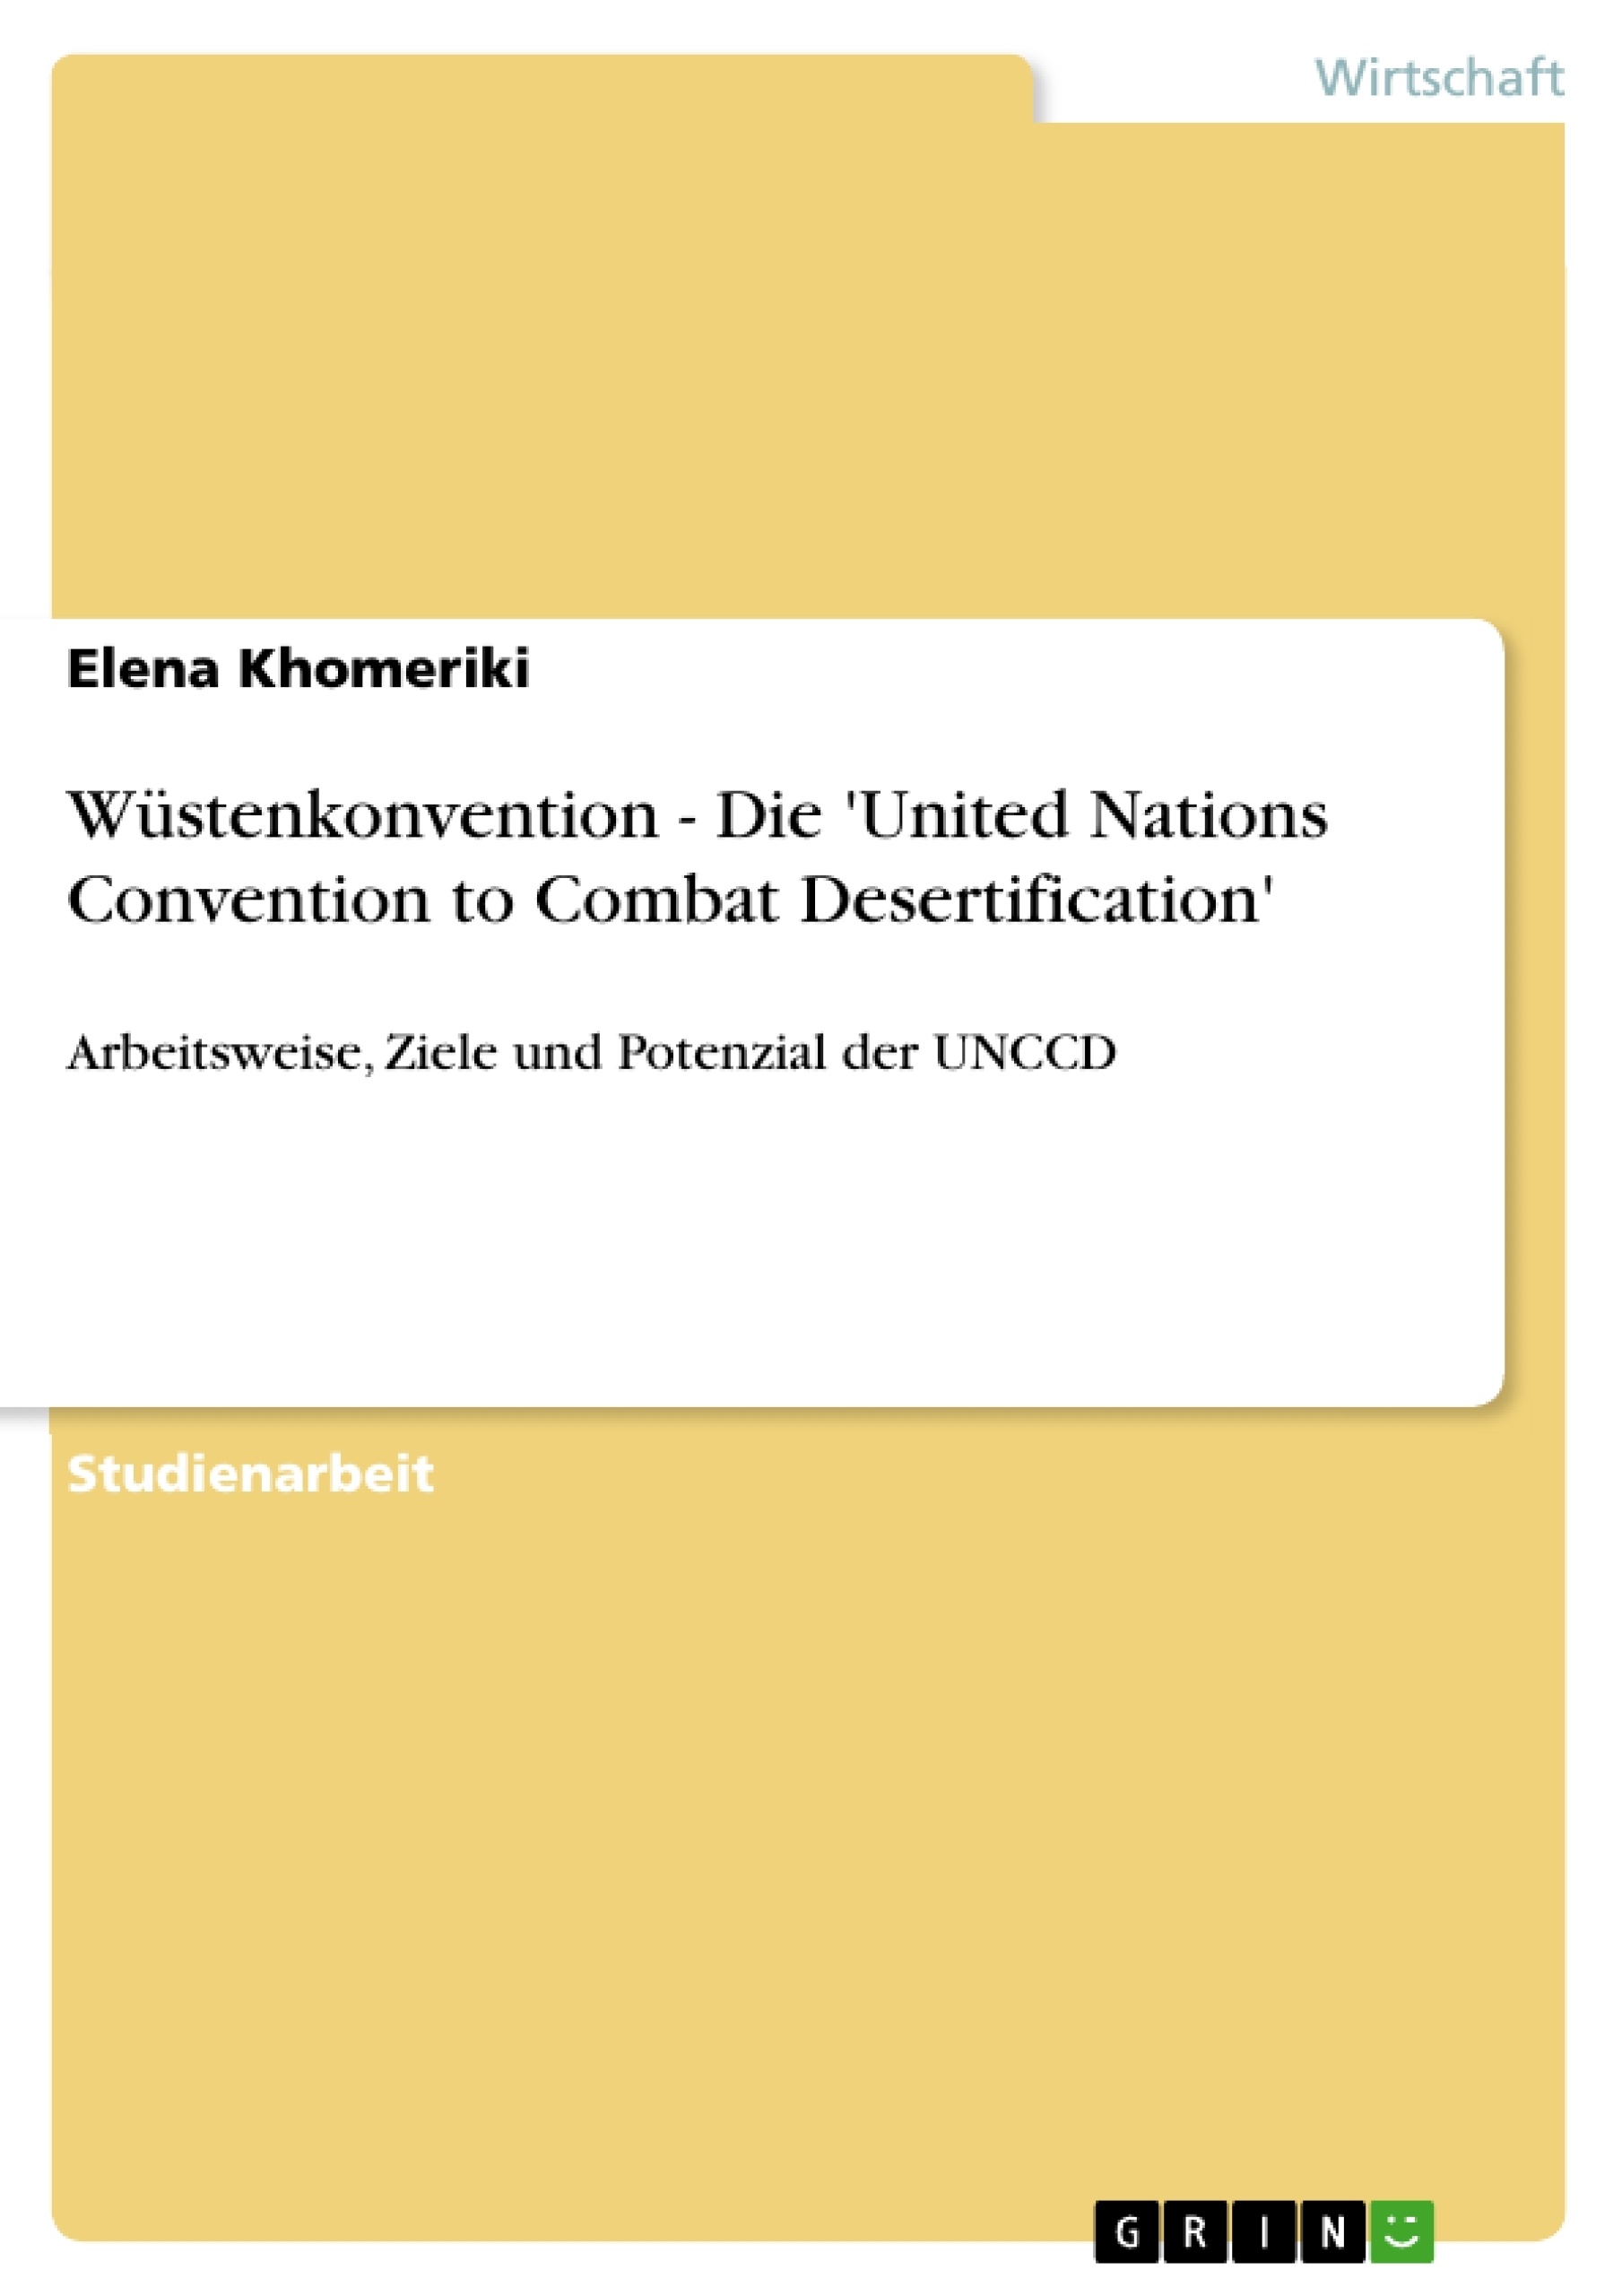 Título: Wüstenkonvention - Die 'United Nations Convention to Combat Desertification'